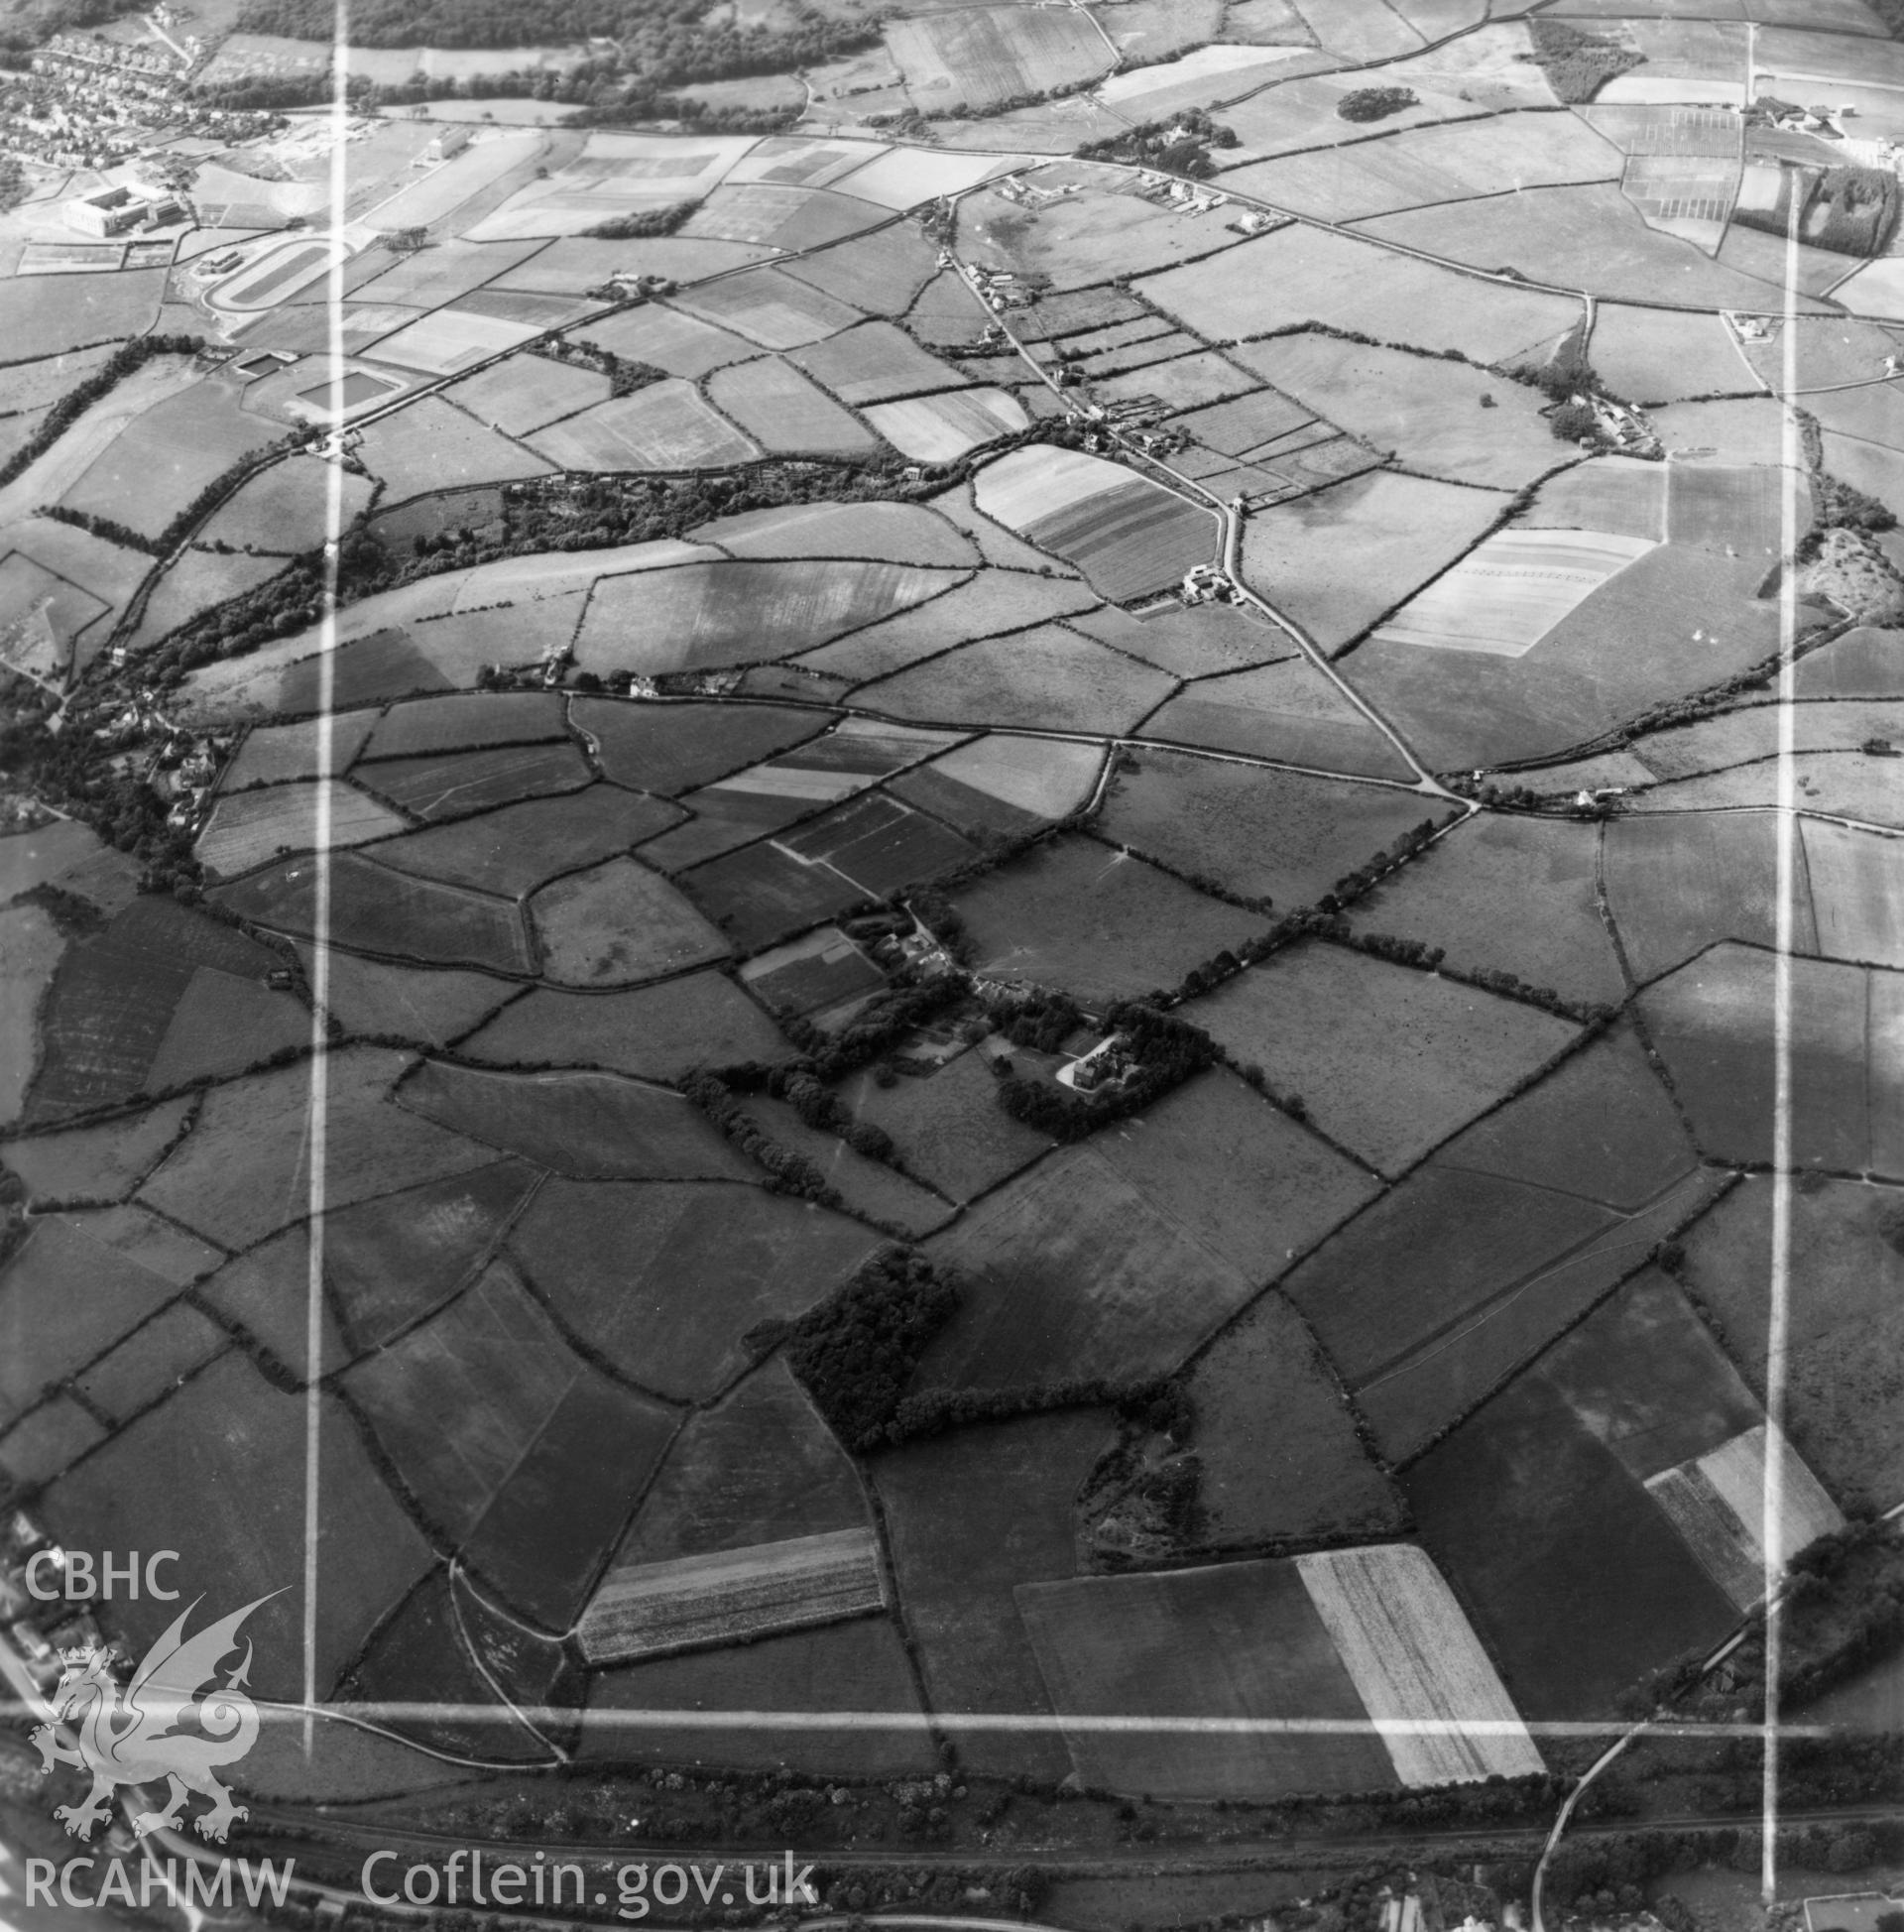 View of landscape above Llanbadarn village showing site of Agricultural college and Plas Lluest, commissioned by J.E. Nichols. Oblique aerial photograph, 5?" cut roll film.